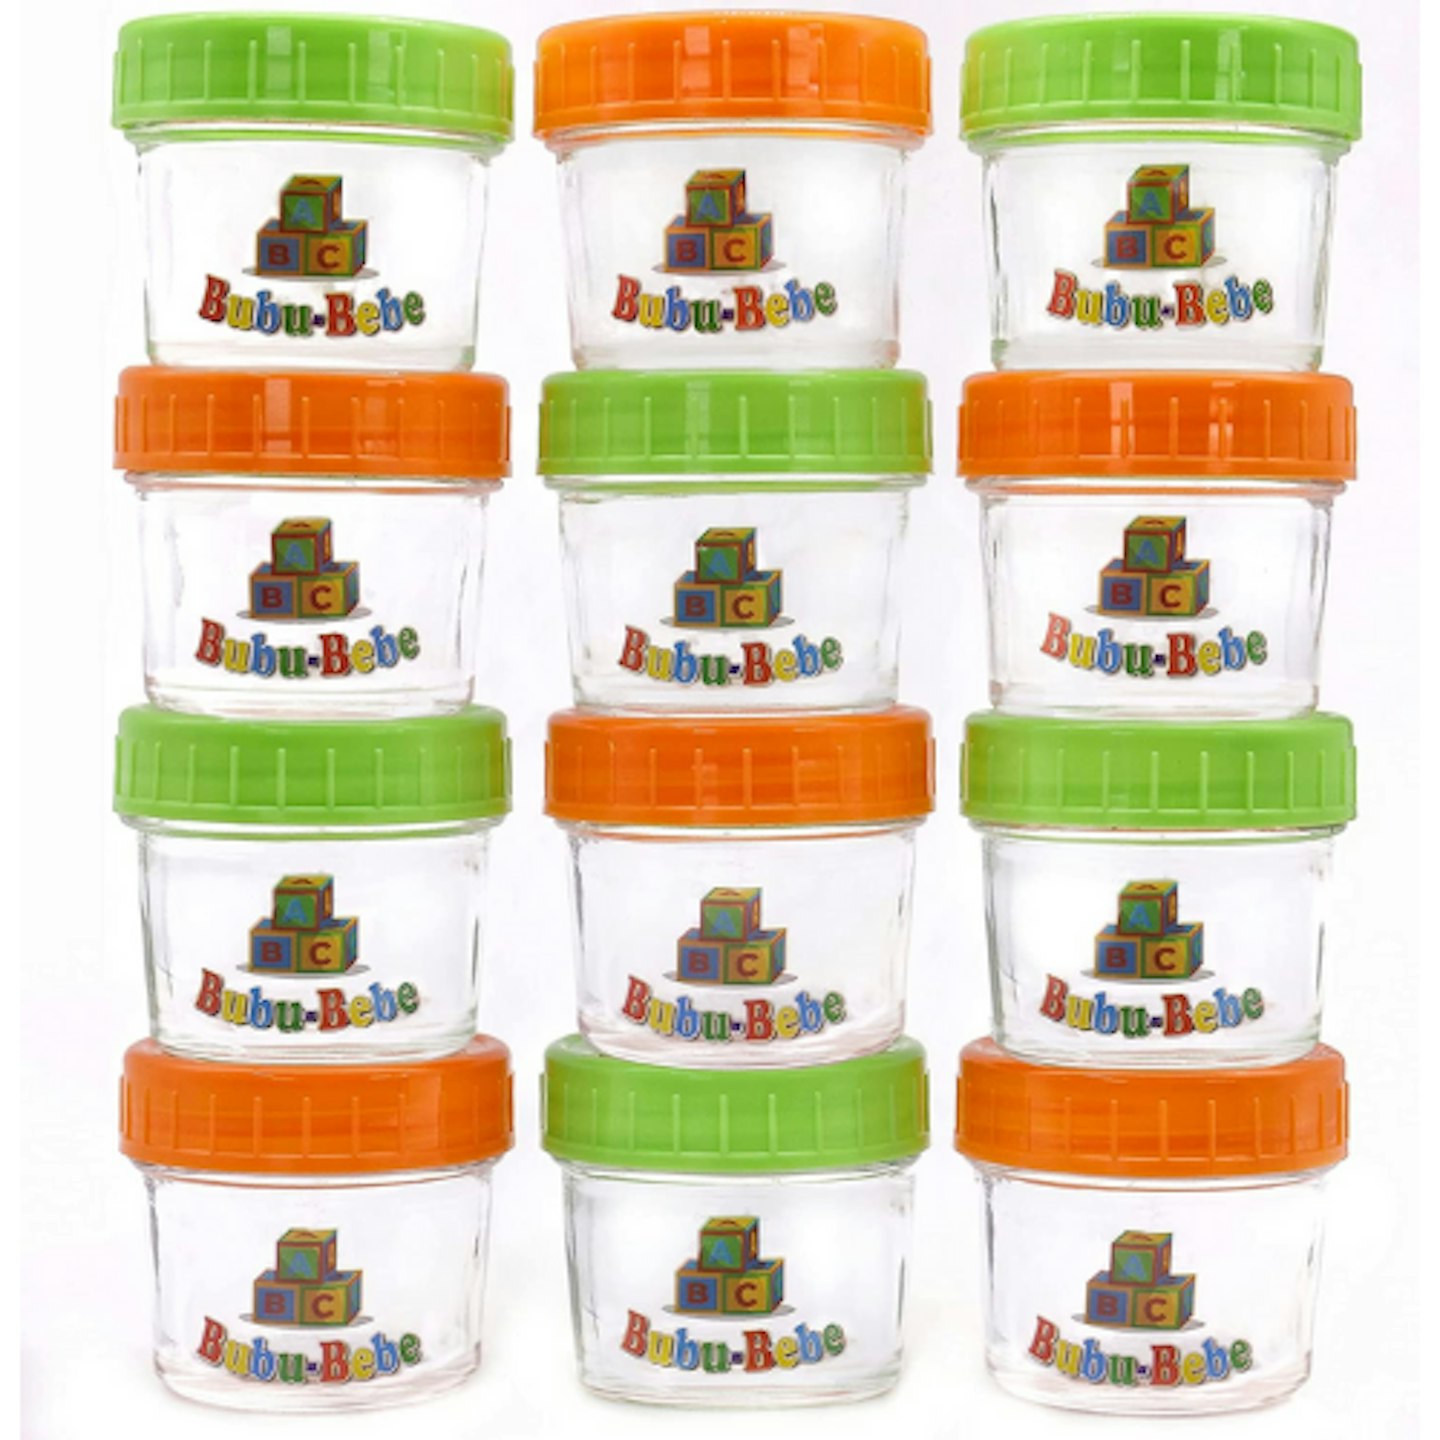 https://images.bauerhosting.com/affiliates/sites/12/motherandbaby/2021/10/ABC-Bubu-Bebe-Glass-Baby-Food-Storage-Containers.png?auto=format&w=1440&q=80